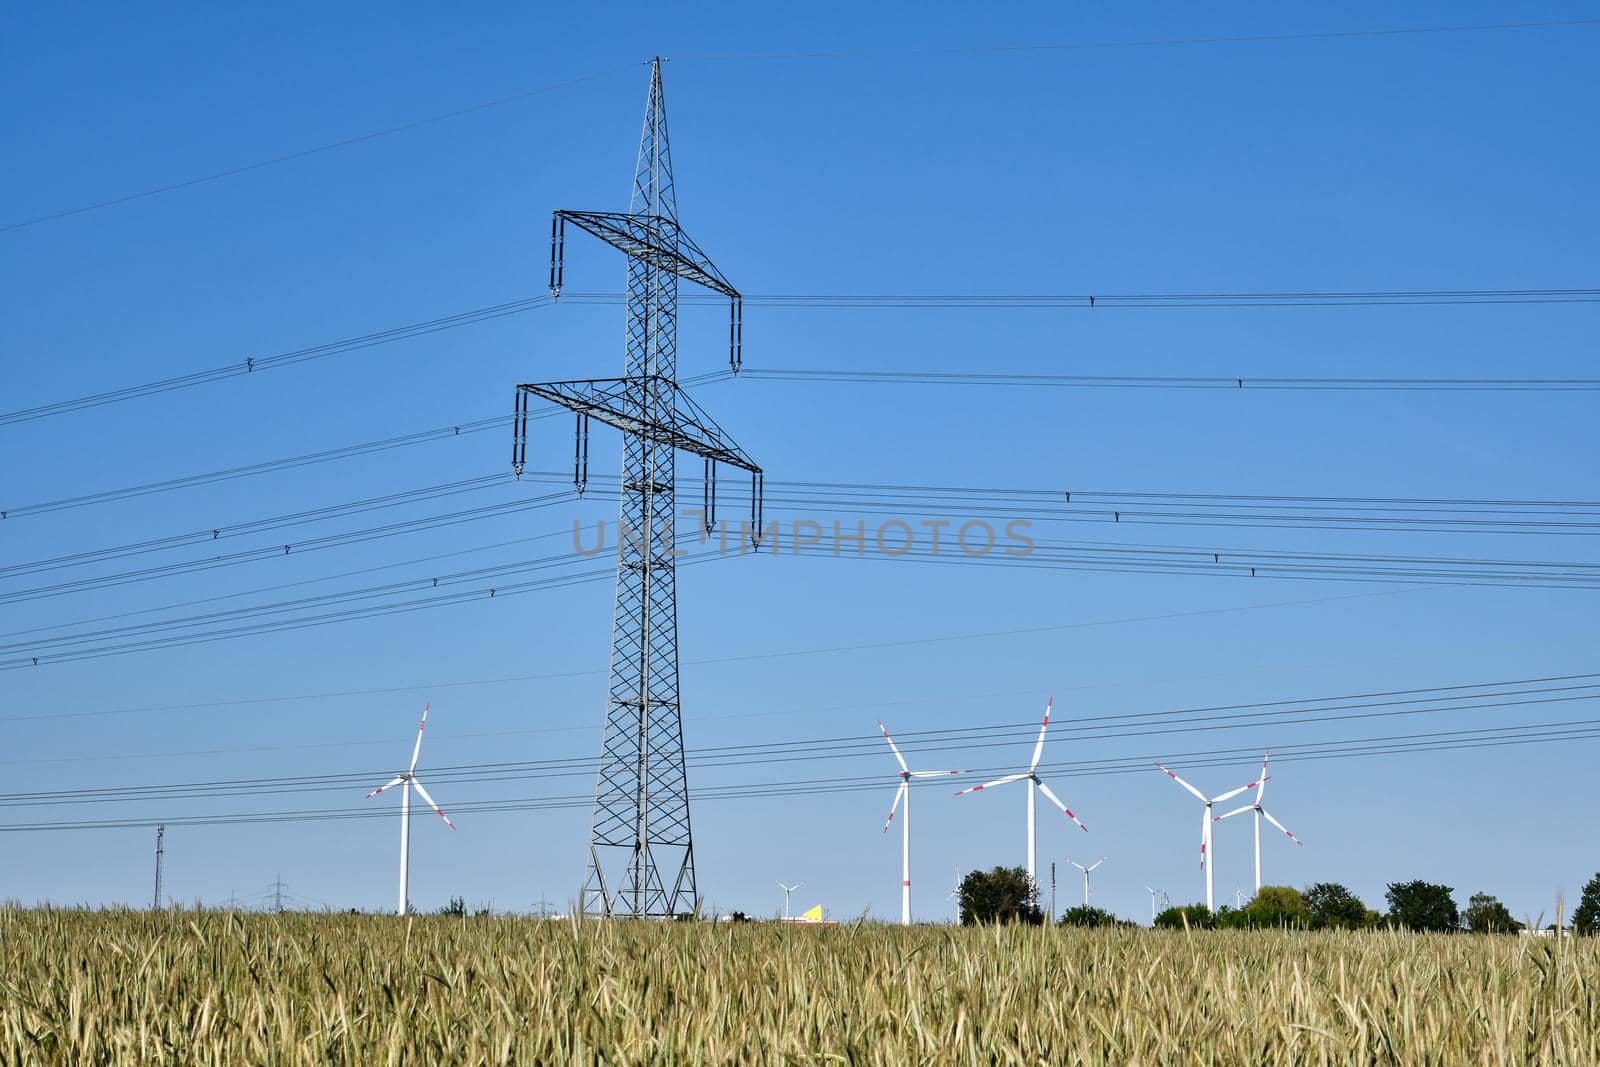 Electricity pylon with power lines and wind turbines in the background seen in Germany